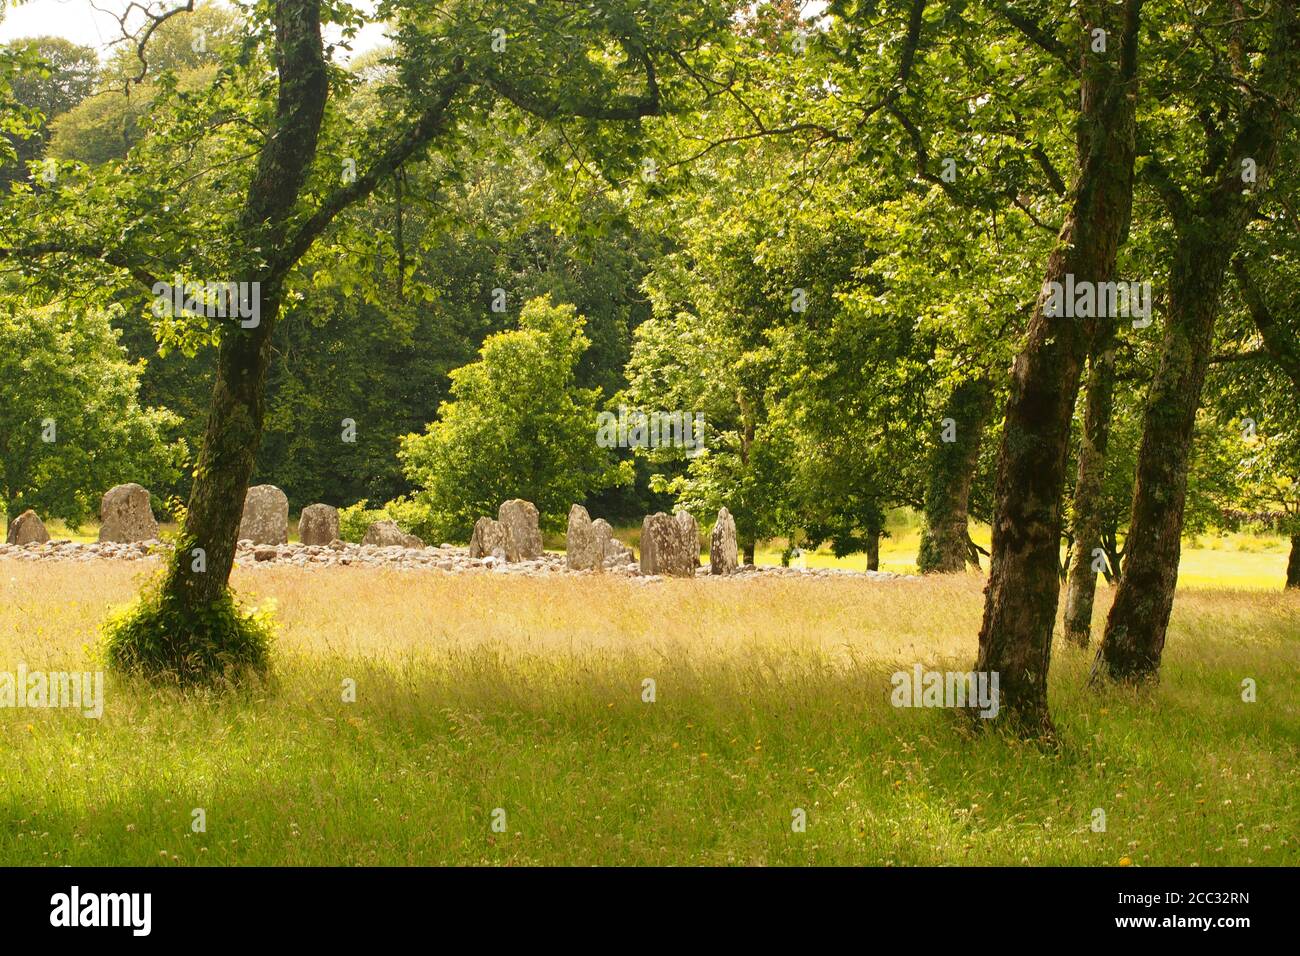 A view of Temple Wood stone circle, Kilmartin Glen, Argyll, Scotland amongst the trees and grass a complex ritural and funerary site, 2,000 years old Stock Photo